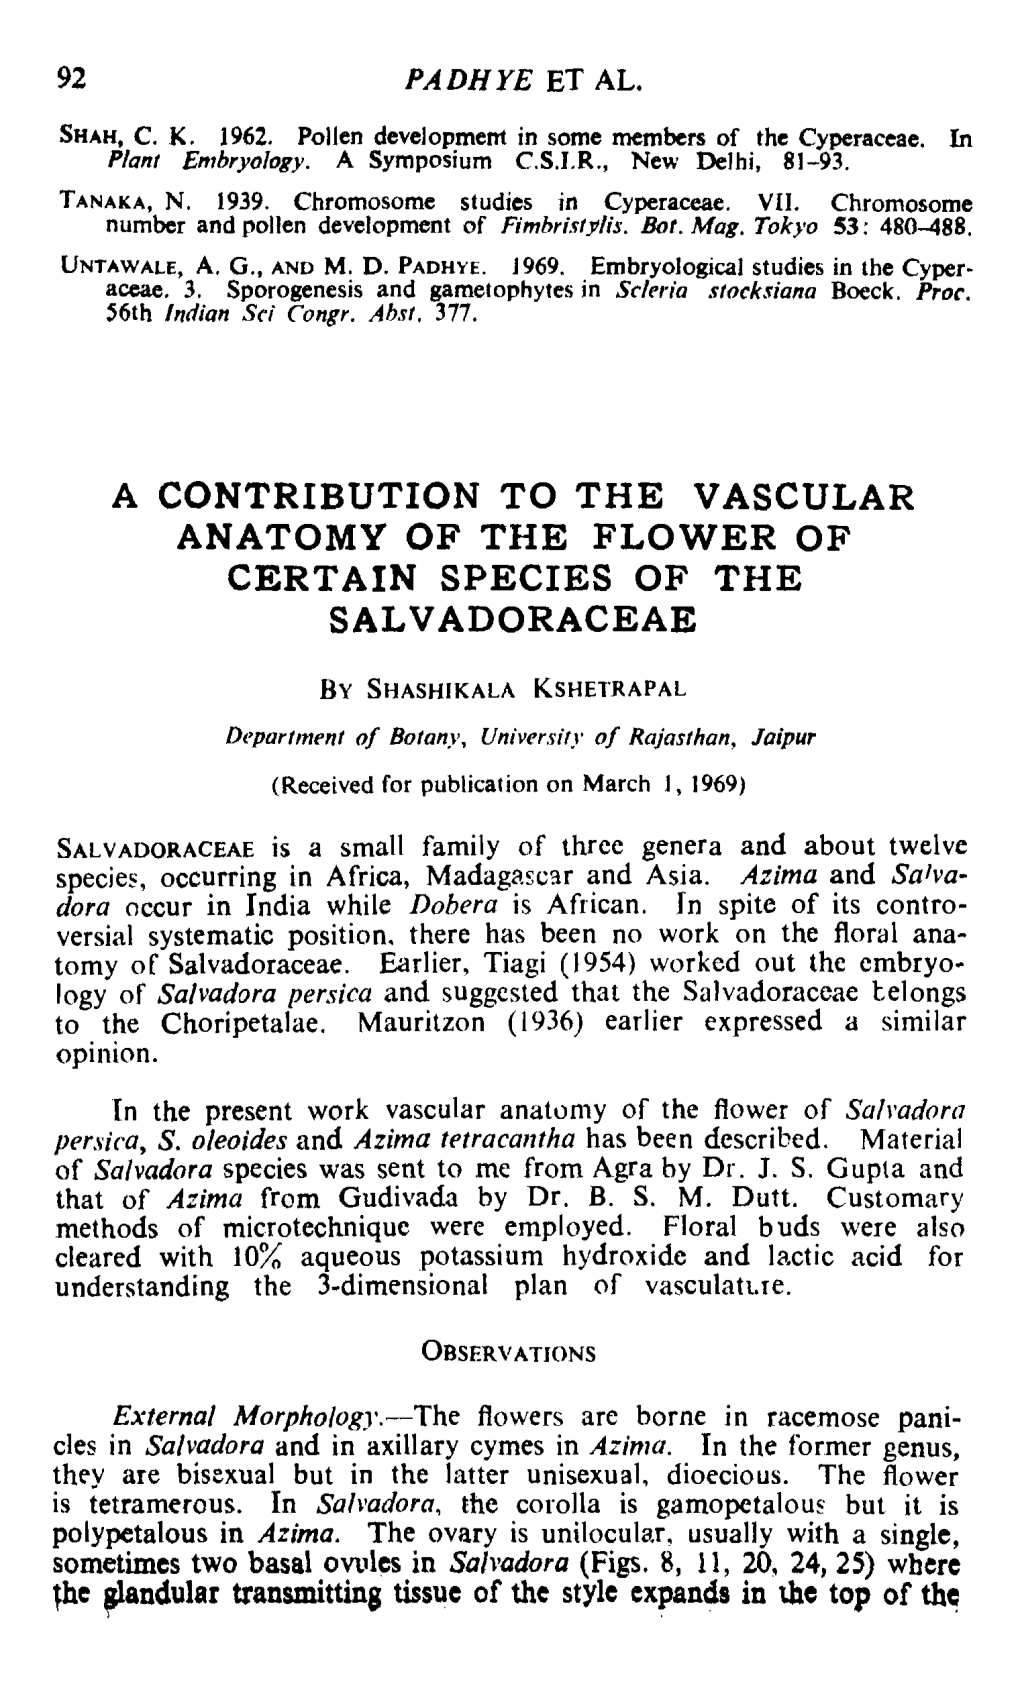 A Contribution to the Vascular Anatomy of the Flower of Certain Species of the Salvadoraceae